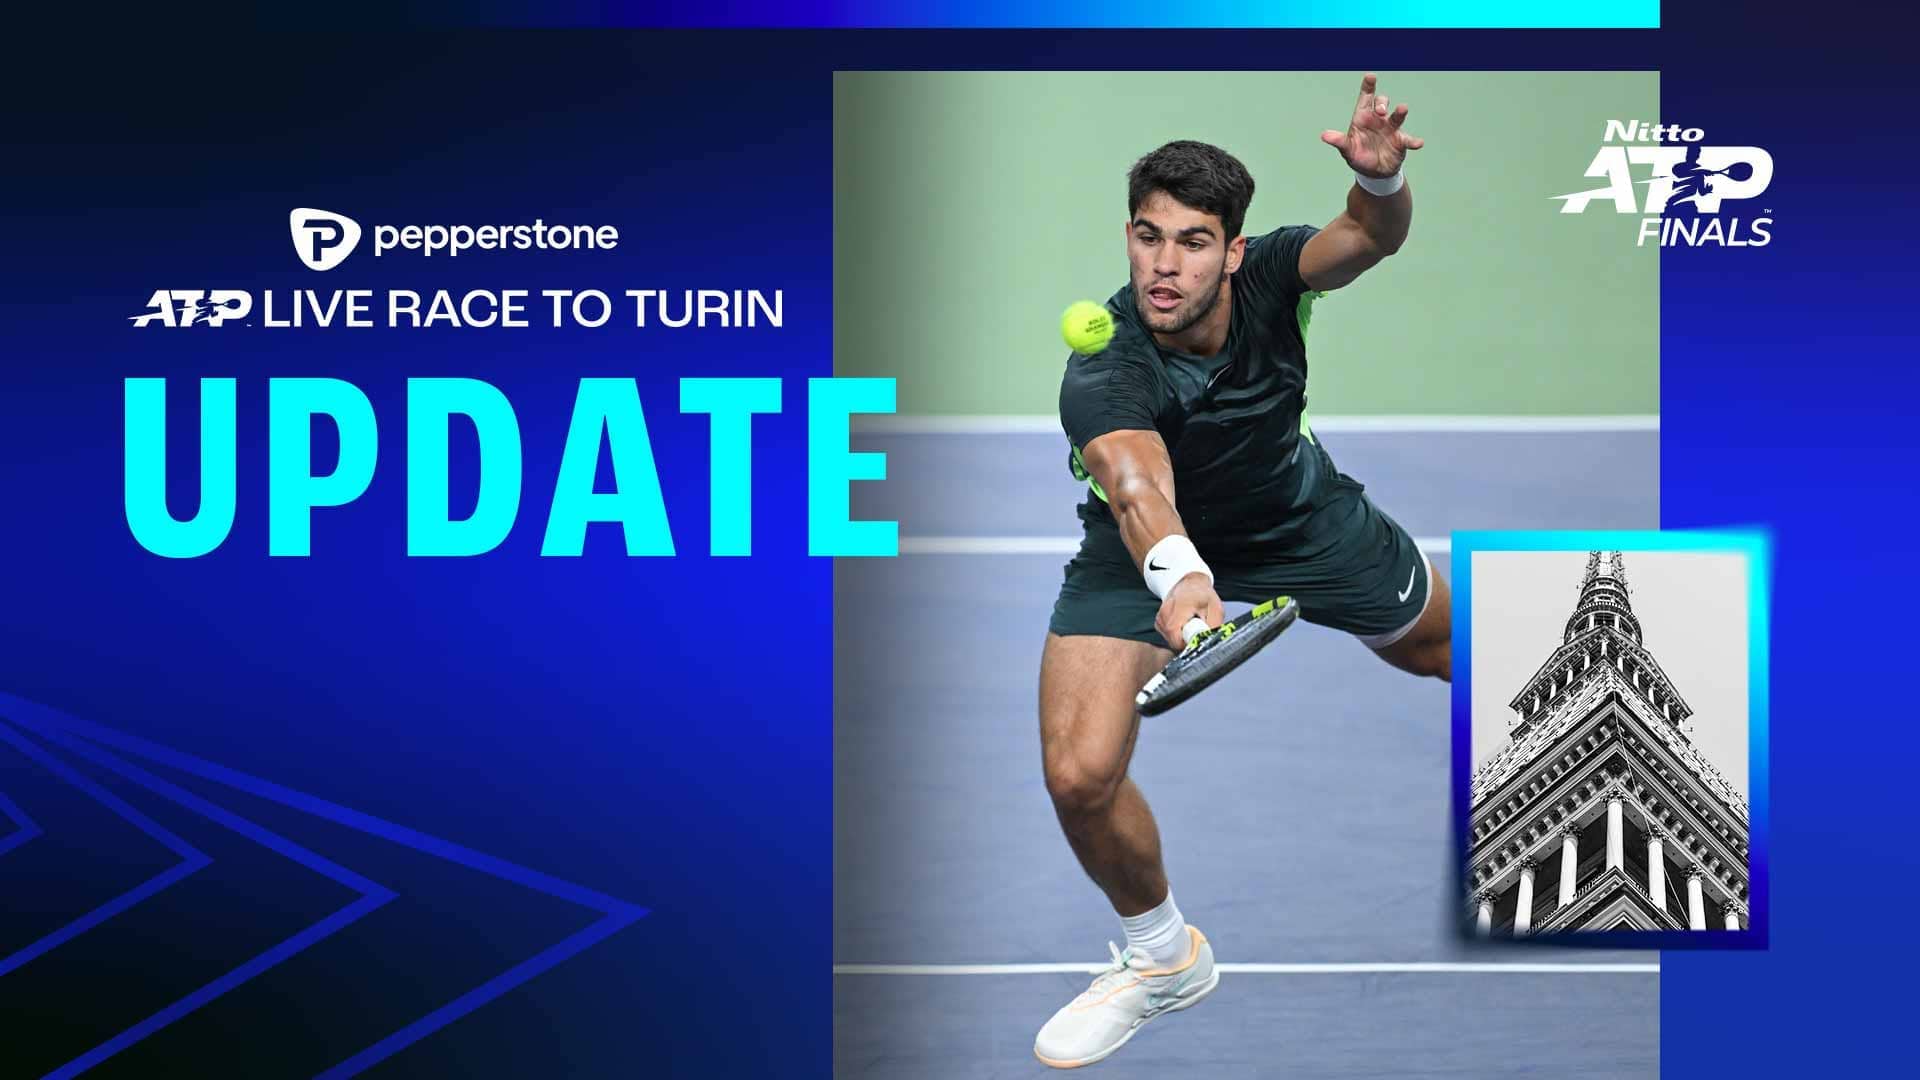 Carlos Alcaraz is in second place in the Pepperstone ATP Live Race To Turin.